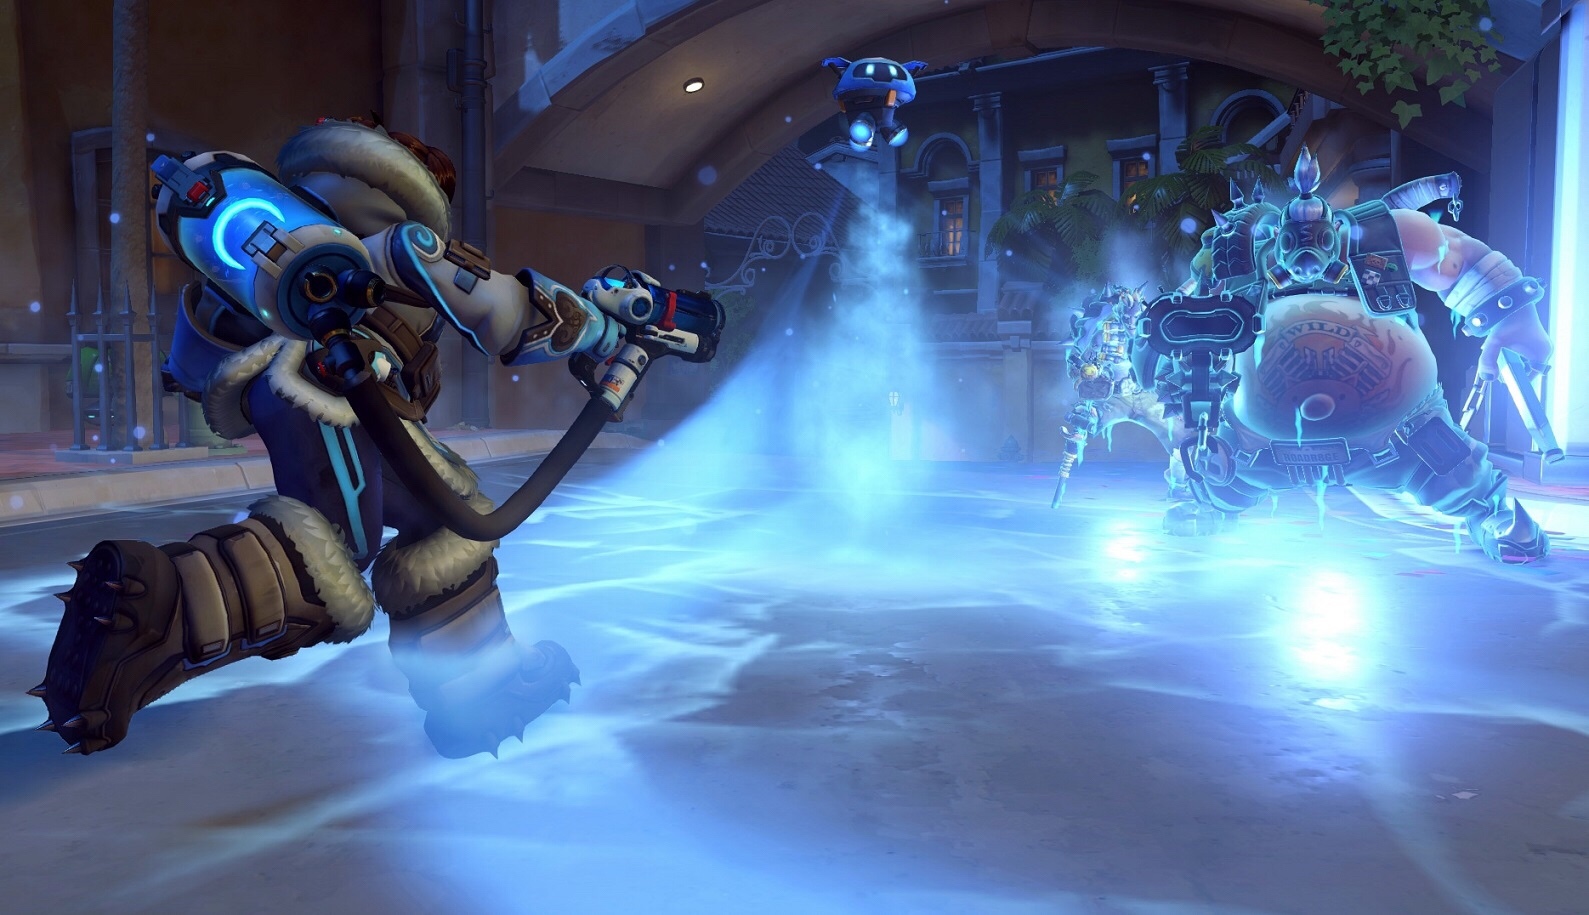 Blizzard is on the lookout for toxic Overwatch players on YouTube